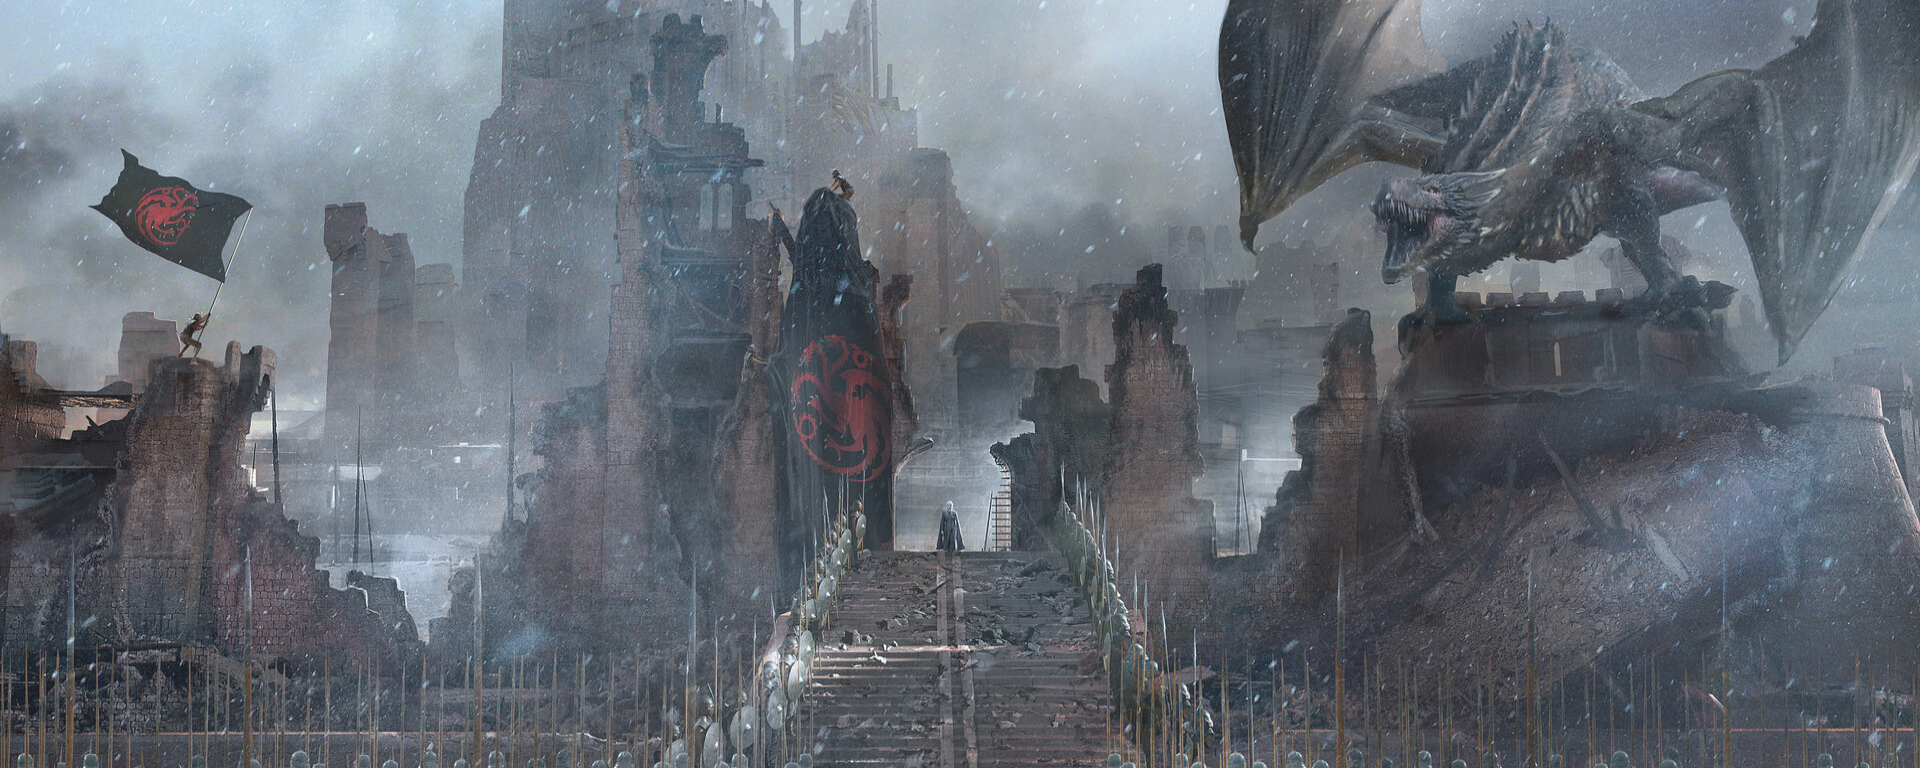 Concept artist Kieran Belshaw created this artwork of the Red Keep Gate in ruins for the "Game of Thrones" series finale.